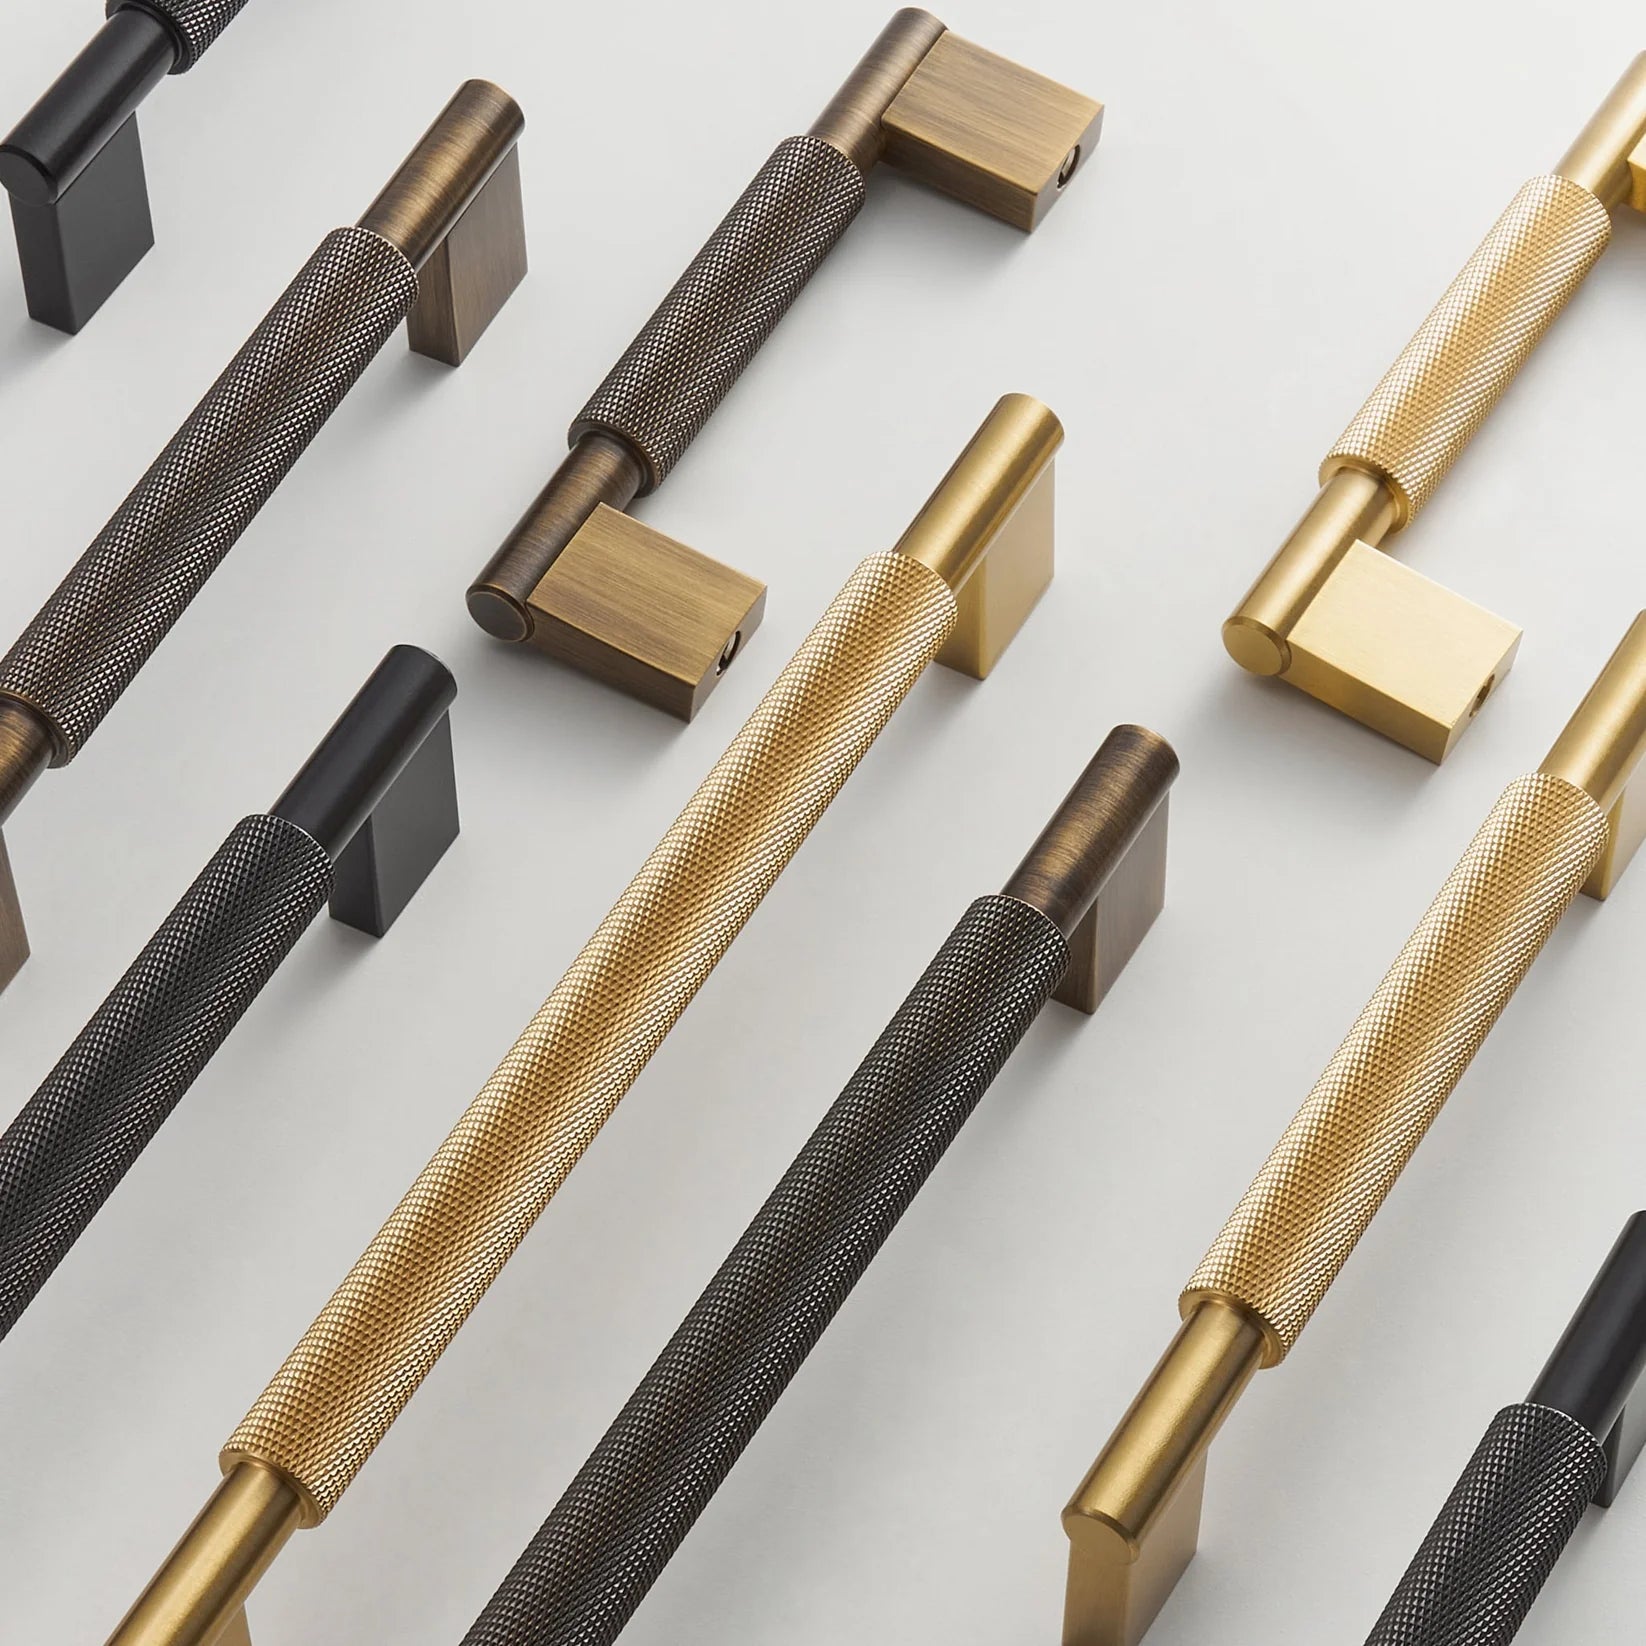 LACIE / Solid Brass Knurled Handles